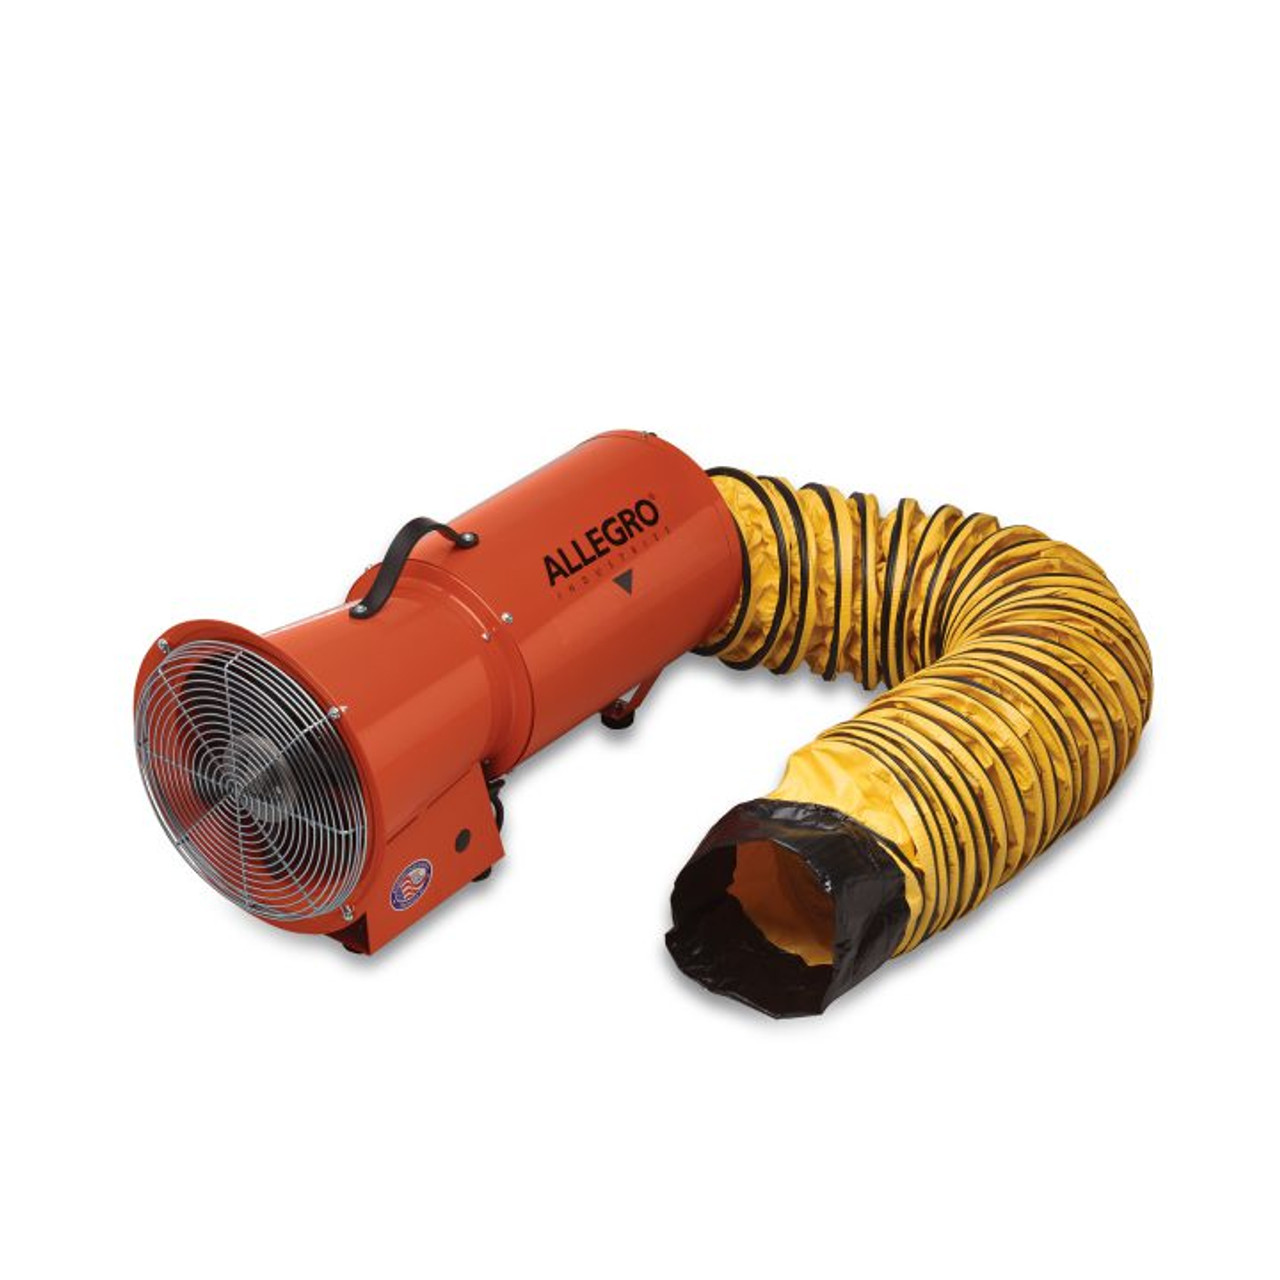 8" Axial AC Blower w/ Canister and 15’ Ducting, 32 lbs.